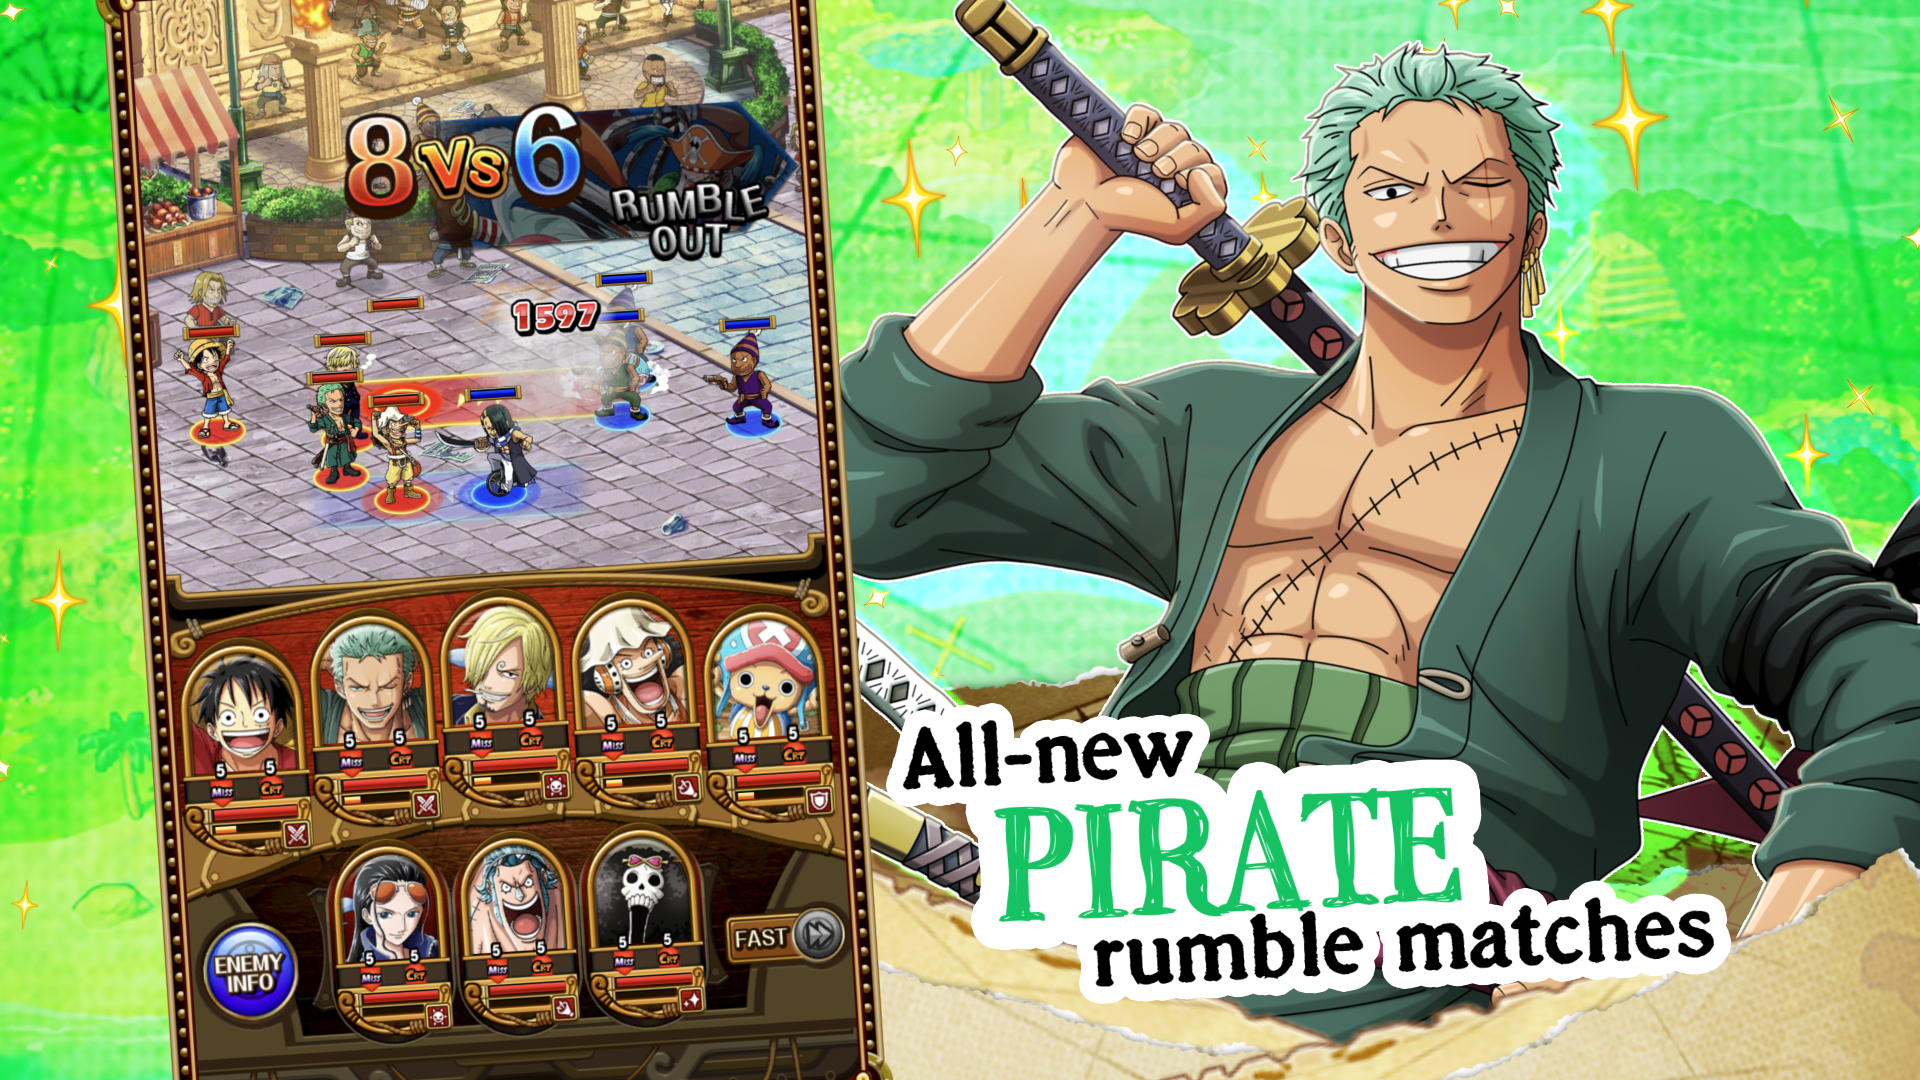 Top 10 Best ONE PIECE Games on Android & iOS ( Offline & Online ) In 2023